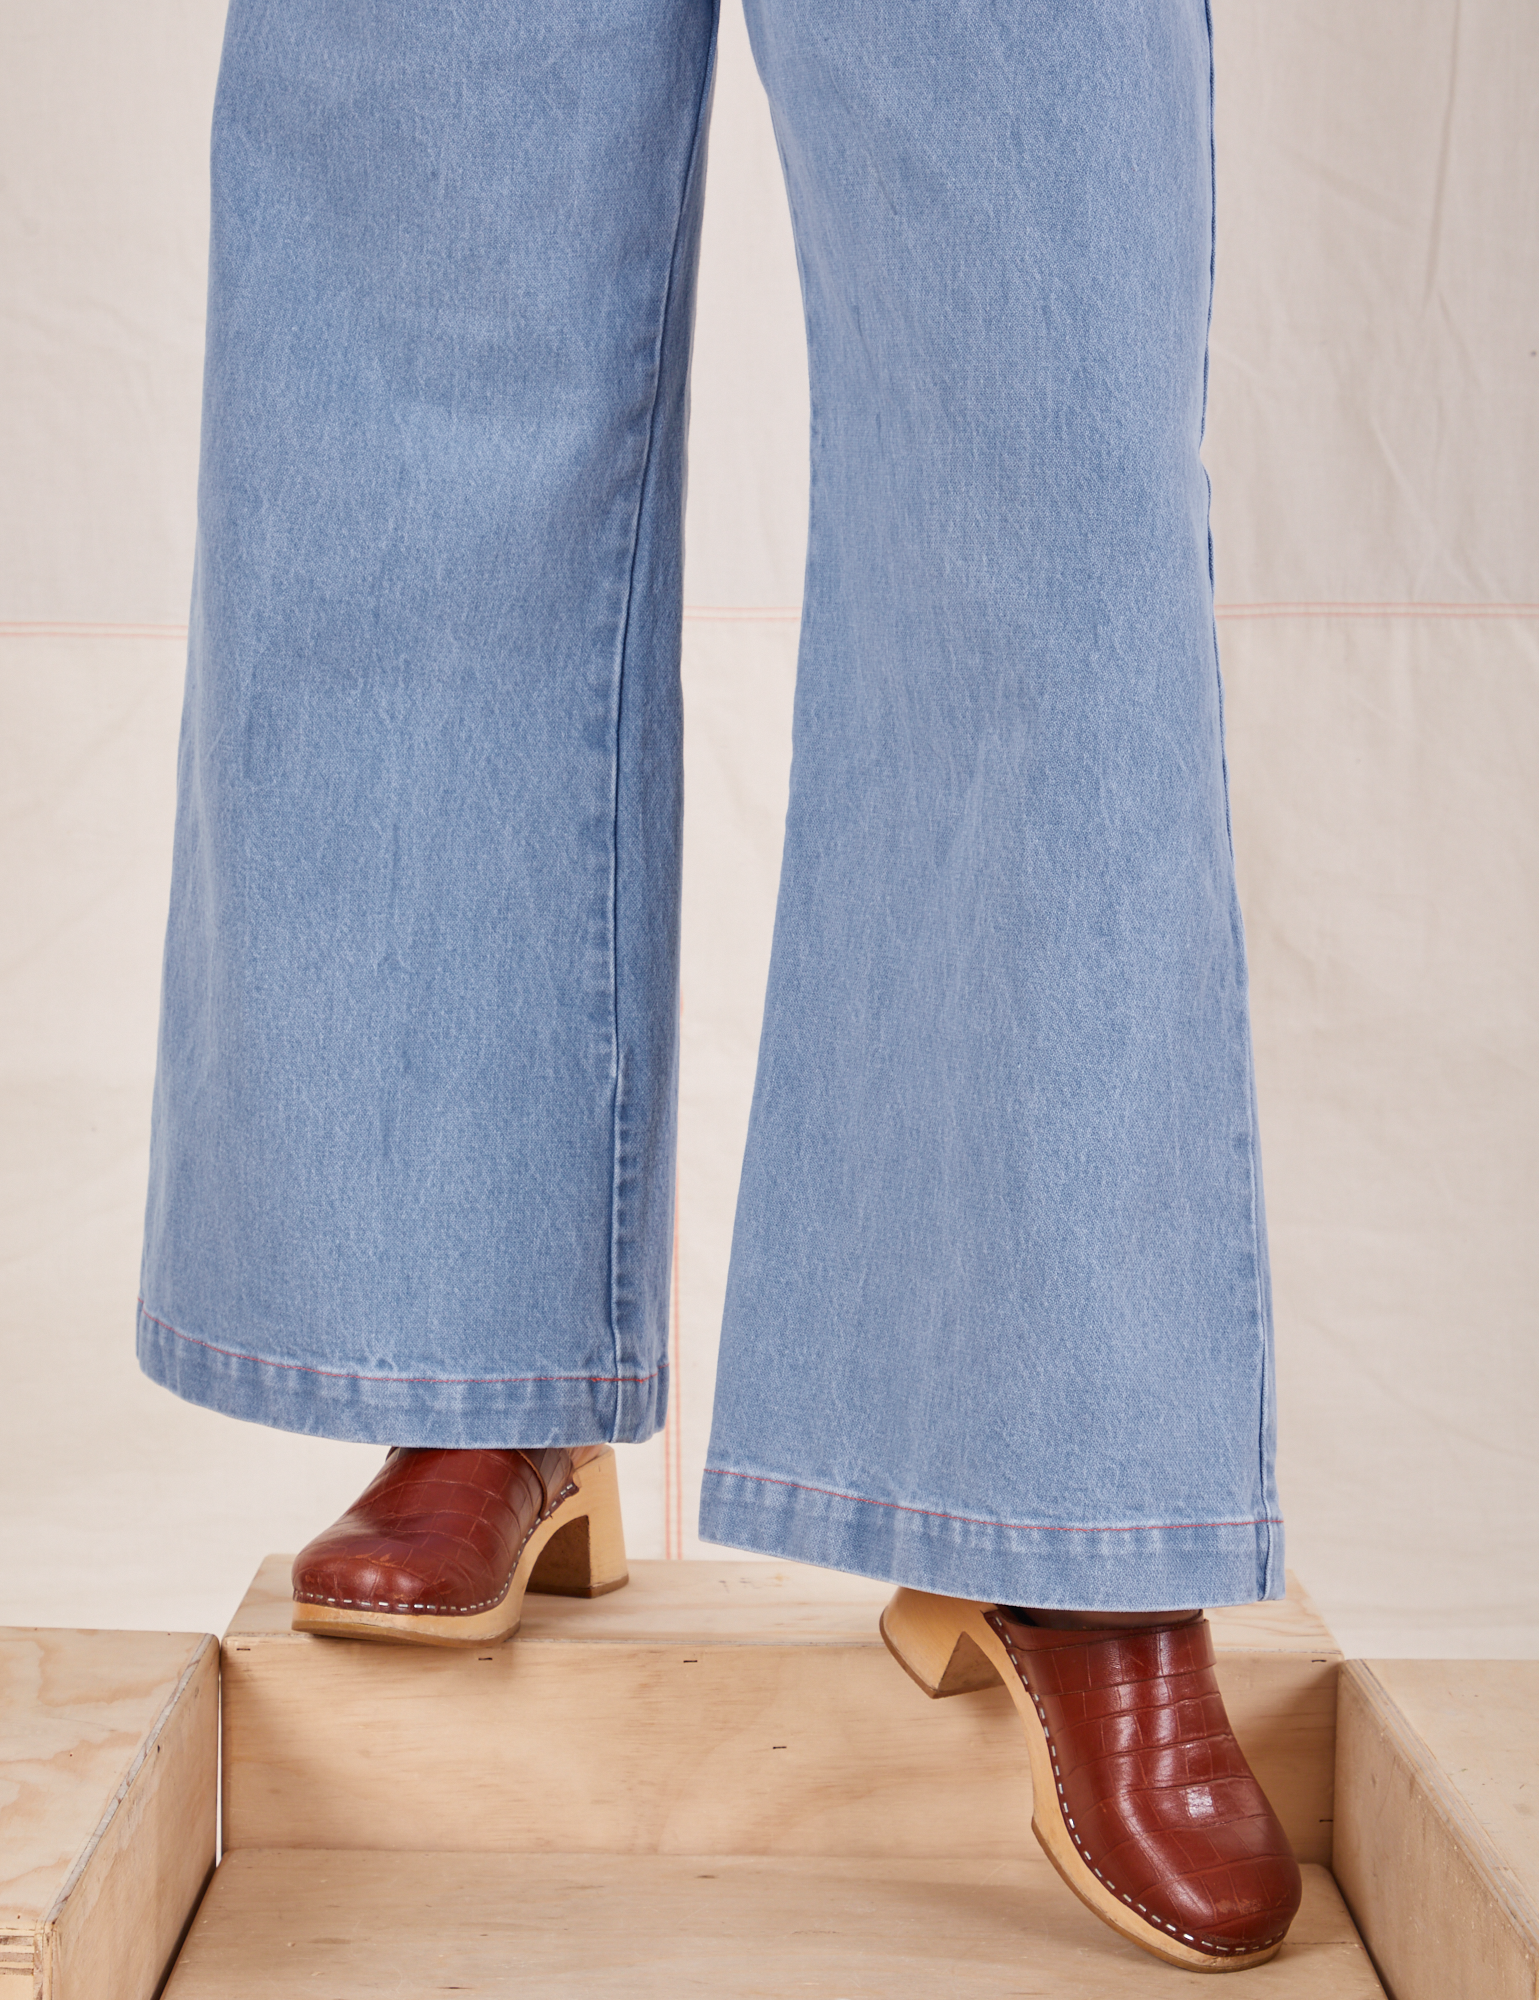 Indigo Wide Leg Trousers in Light Wash pant leg close up on Betty